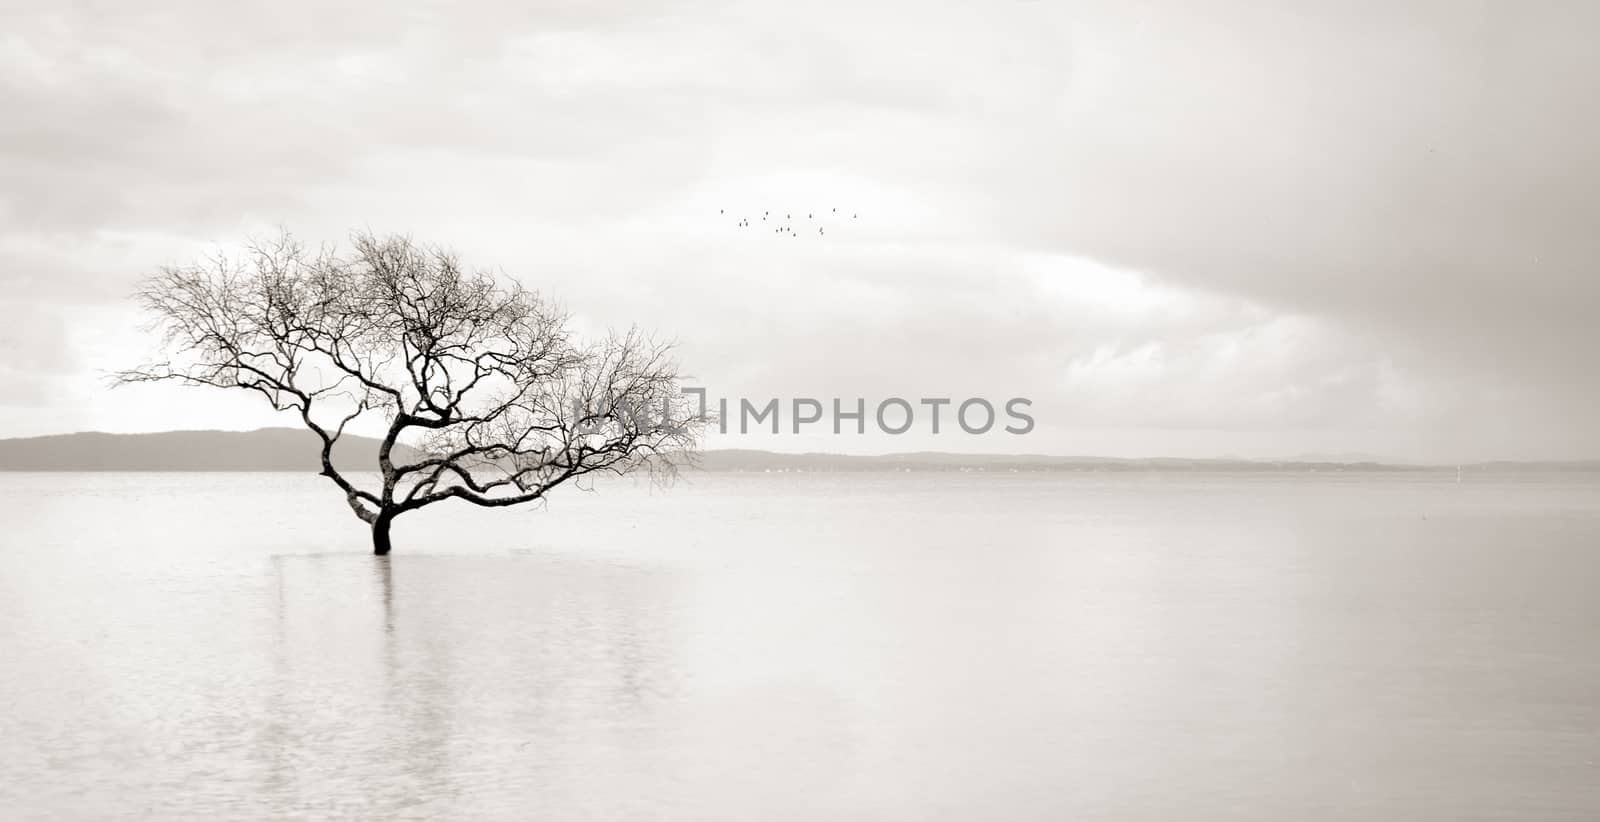 Lone mangrove tree in the still waters of the bay